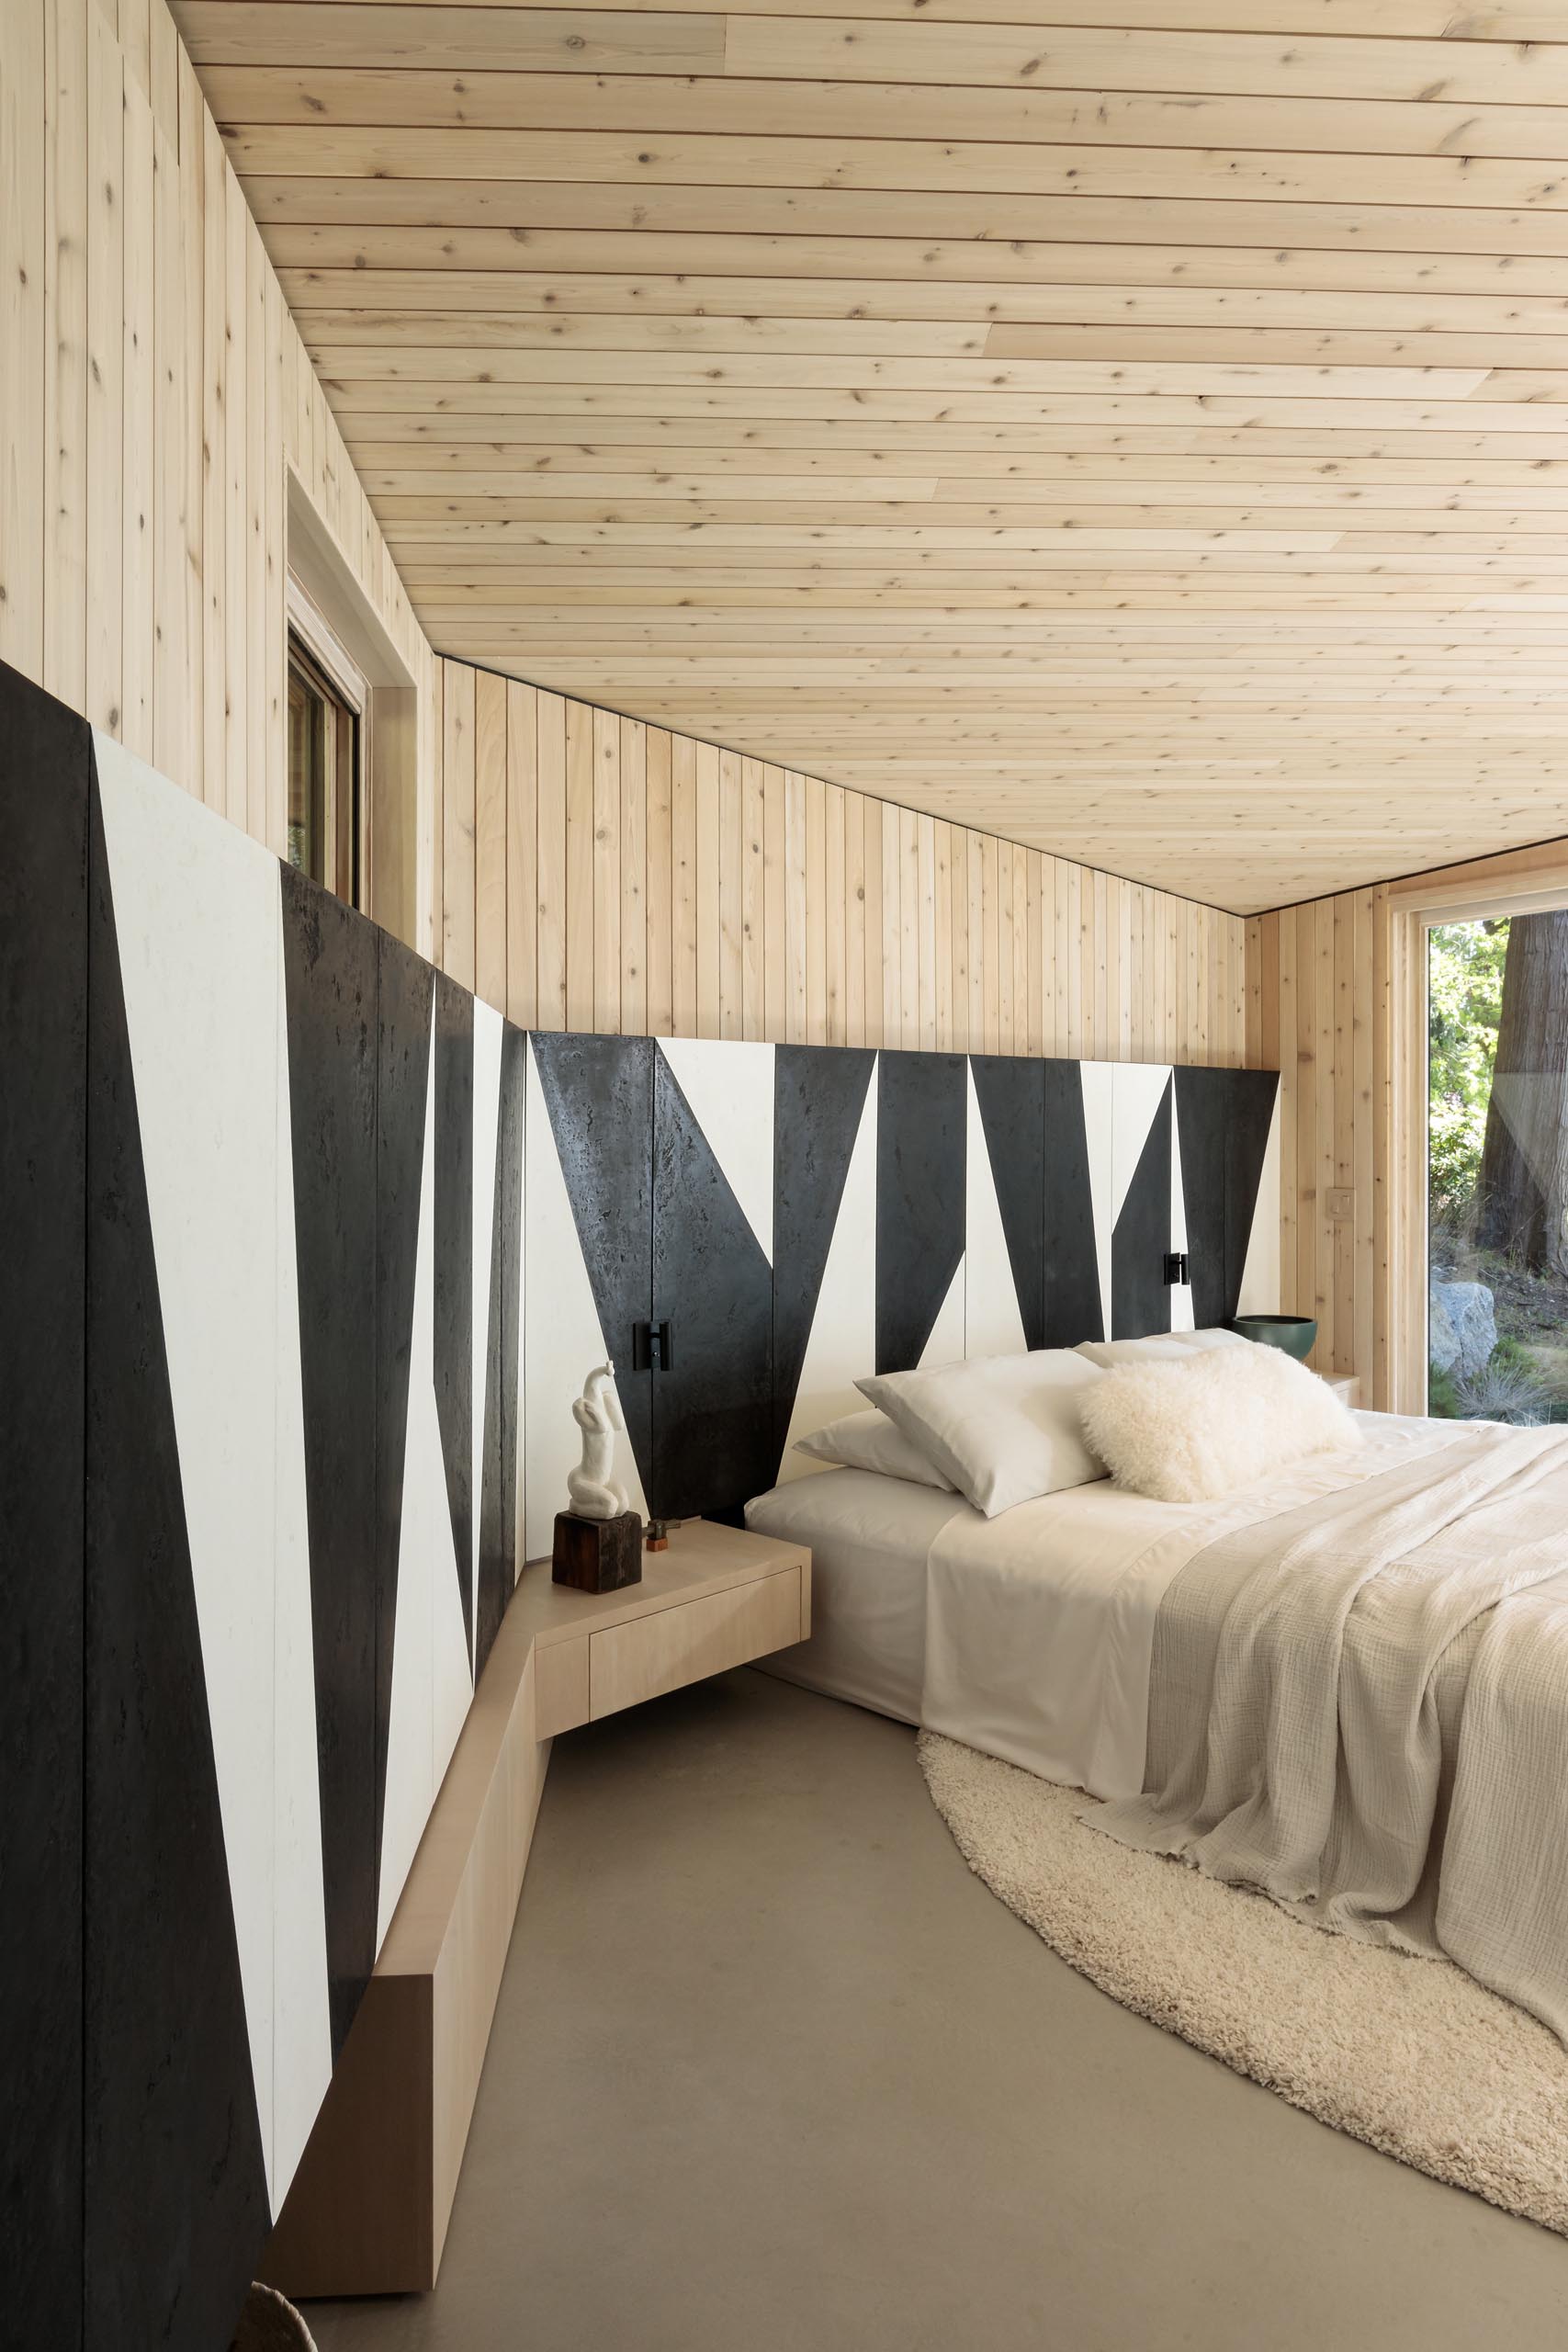 This modern bedroom makes the most of the view by having a wall of windows, while a black and white partial accent wall wraps around the room, and adds an artistic element to the space.